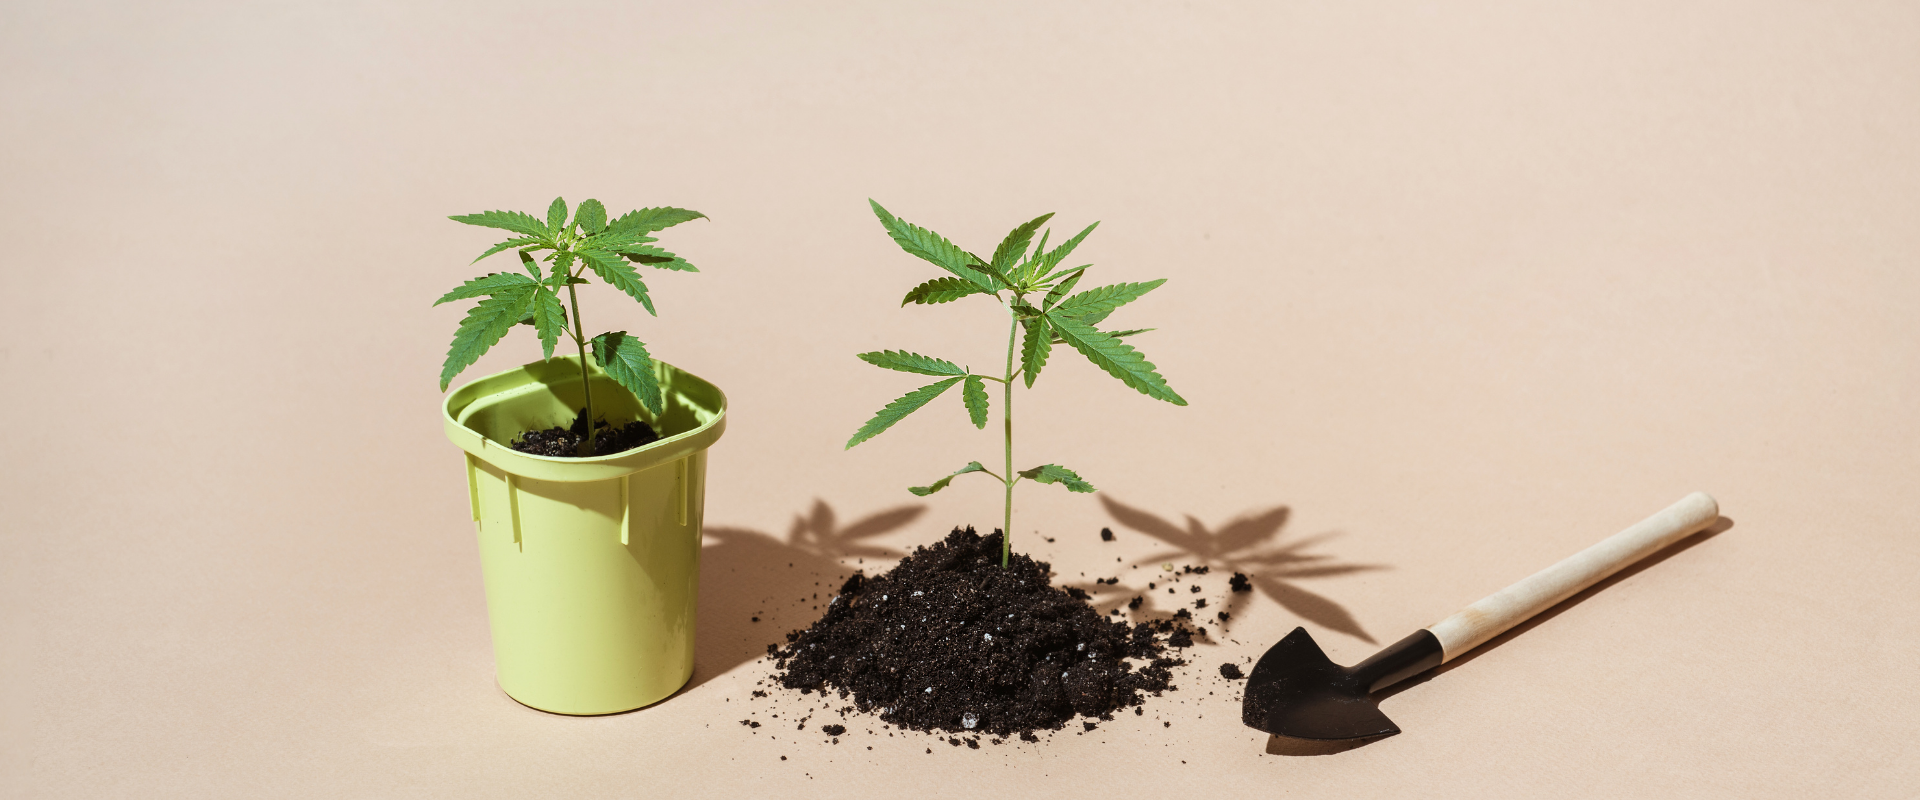 How To Choose the Best Soil for Cannabis